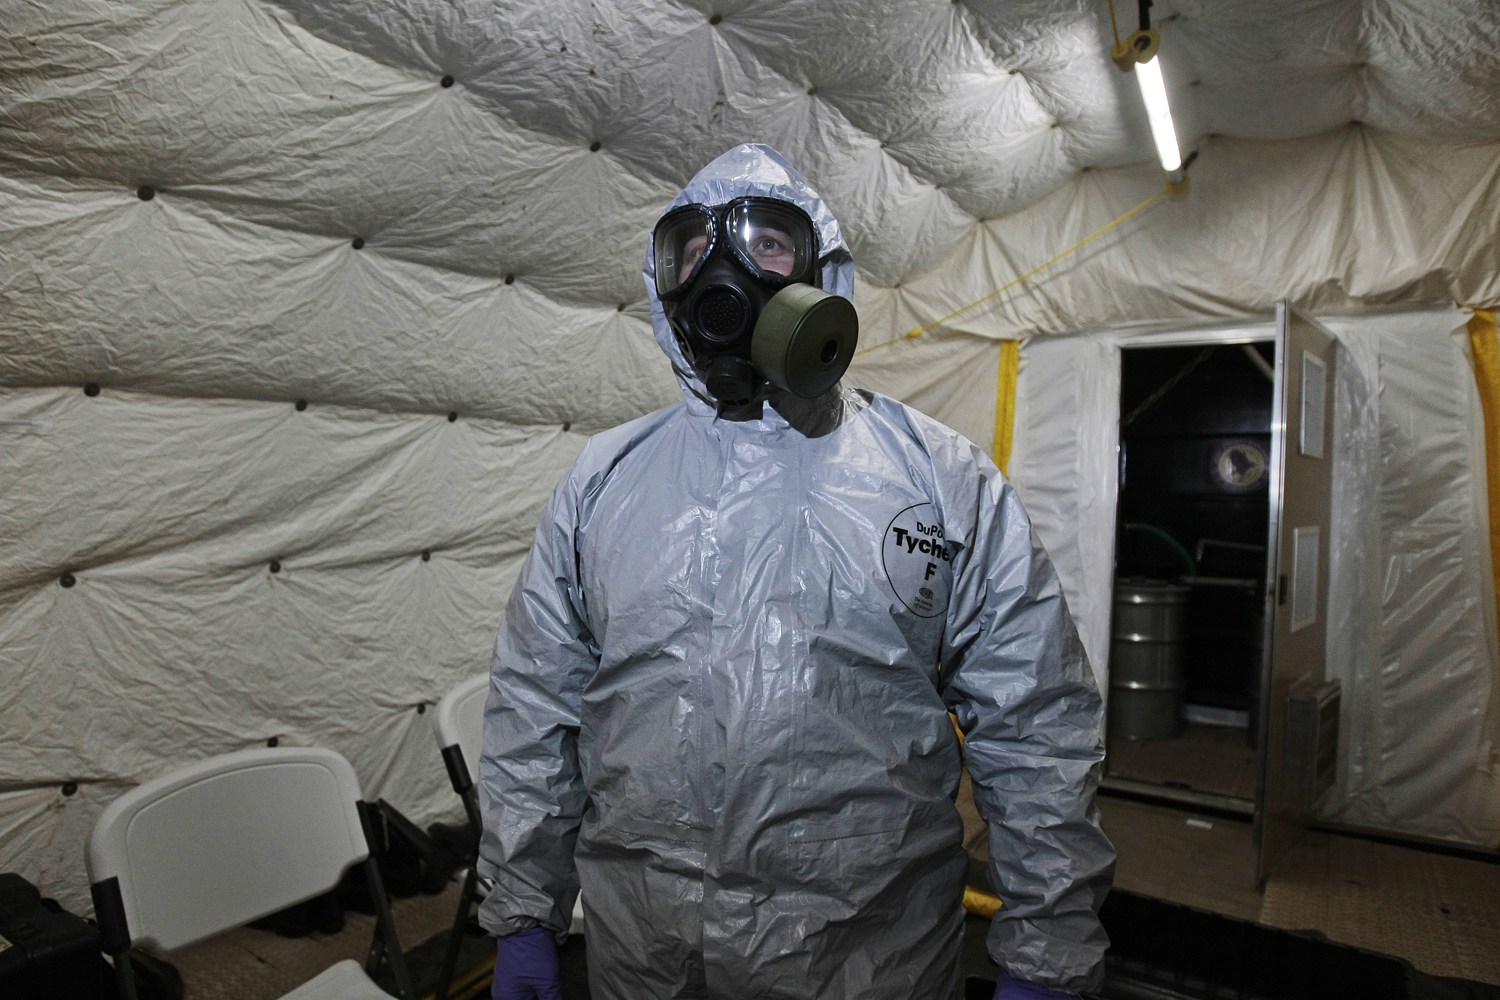 A marine officer of the Cape Ray, a ship equipped to neutralize Syrian chemicals, shows a chemical protection suit  to reporters during a tour around the ship docked at the naval base of Rota used by the U.S, in Spain’s southwestern coast on April 10, 2014. 